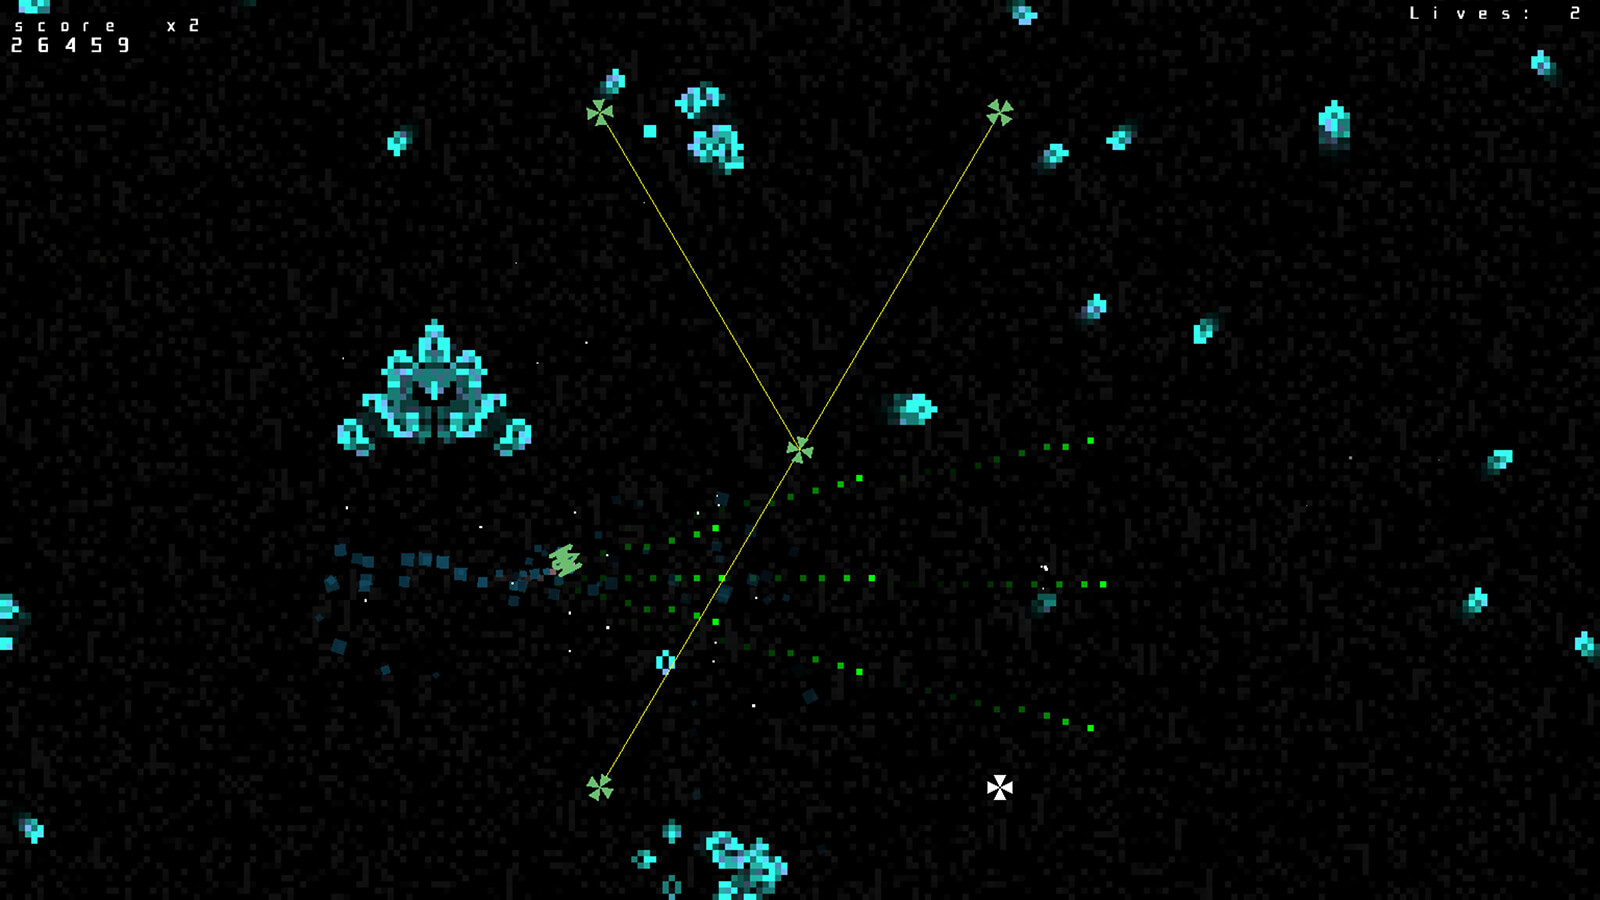 A pixellated spaceship, surrounded by grid-based enemies, fires a stream of projectiles.